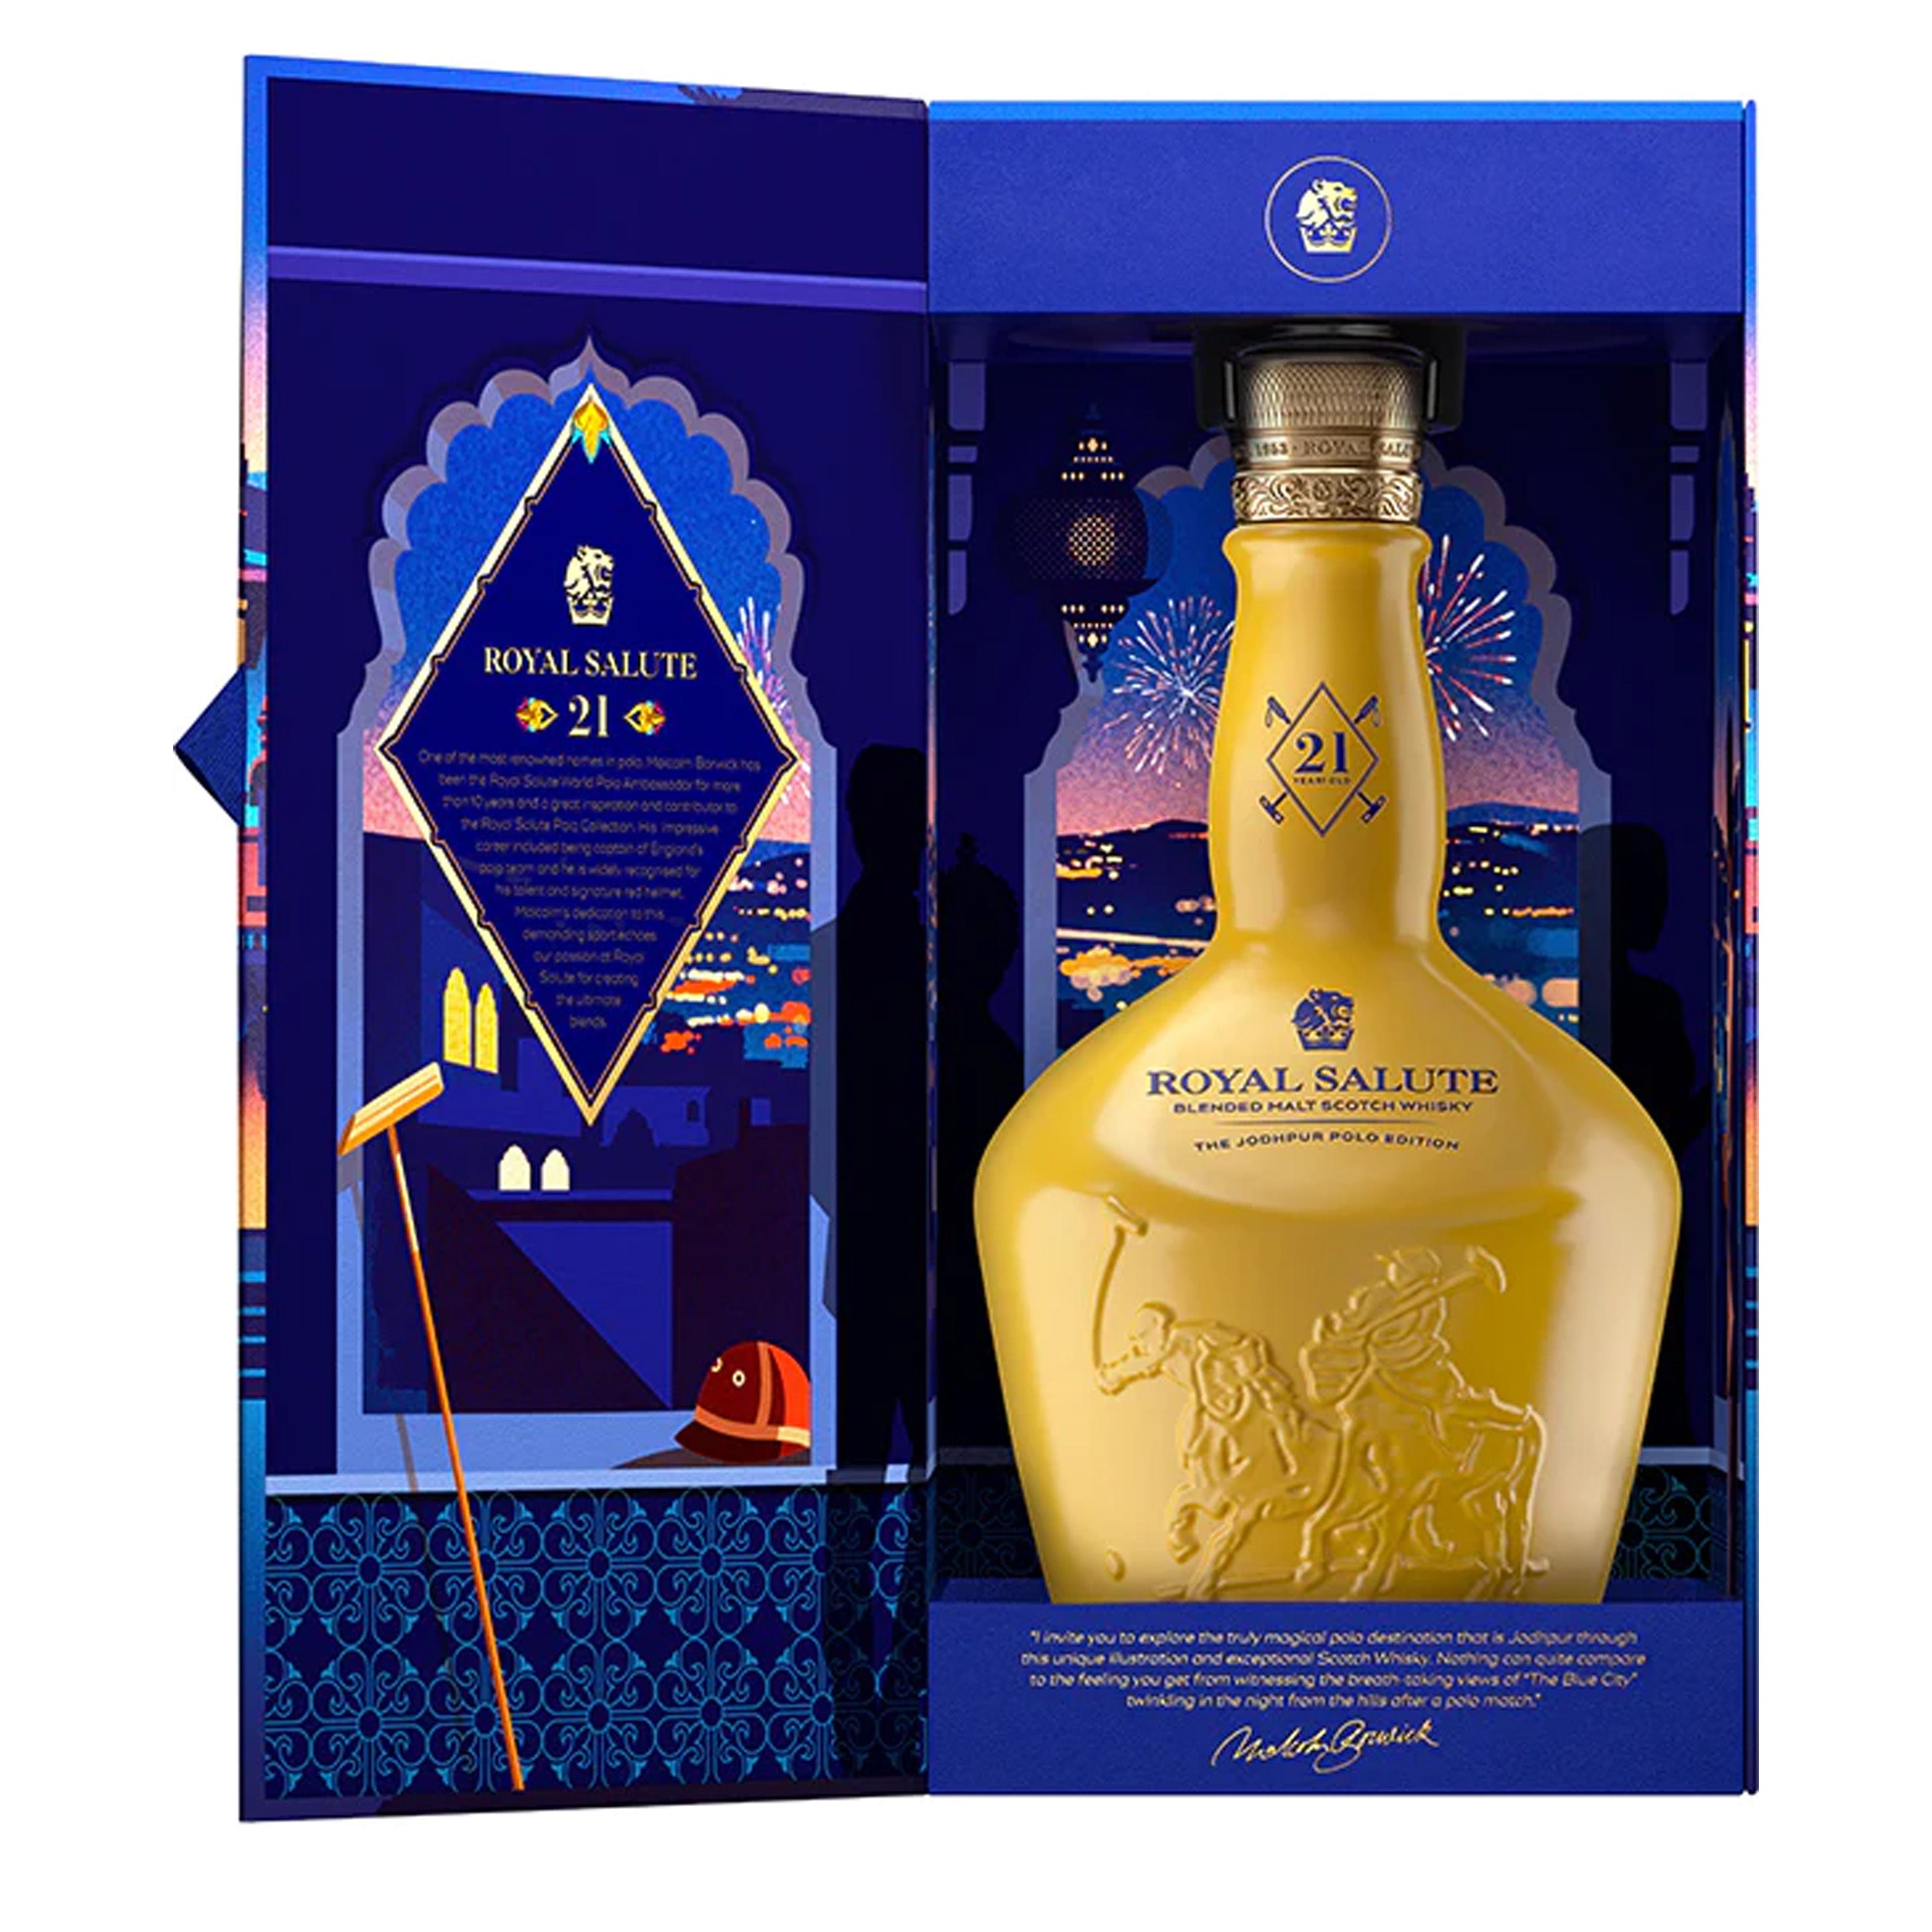 Chivas Regal Royal Salute 21 Year Old Jodhour Polo Edition